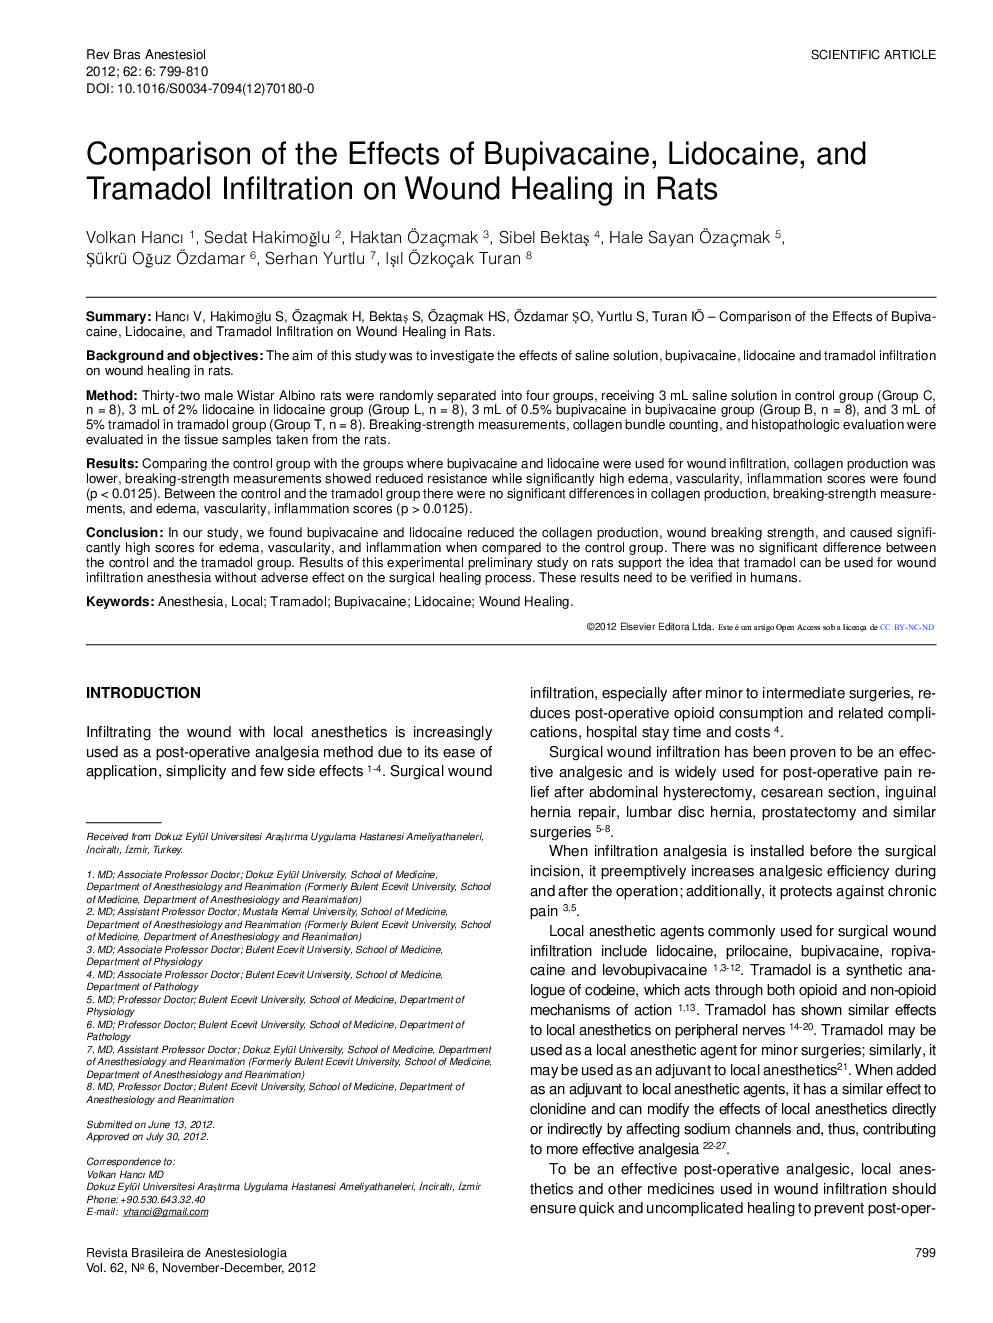 Comparison of the Effects of Bupivacaine, Lidocaine, and Tramadol Infiltration on Wound Healing in Rats